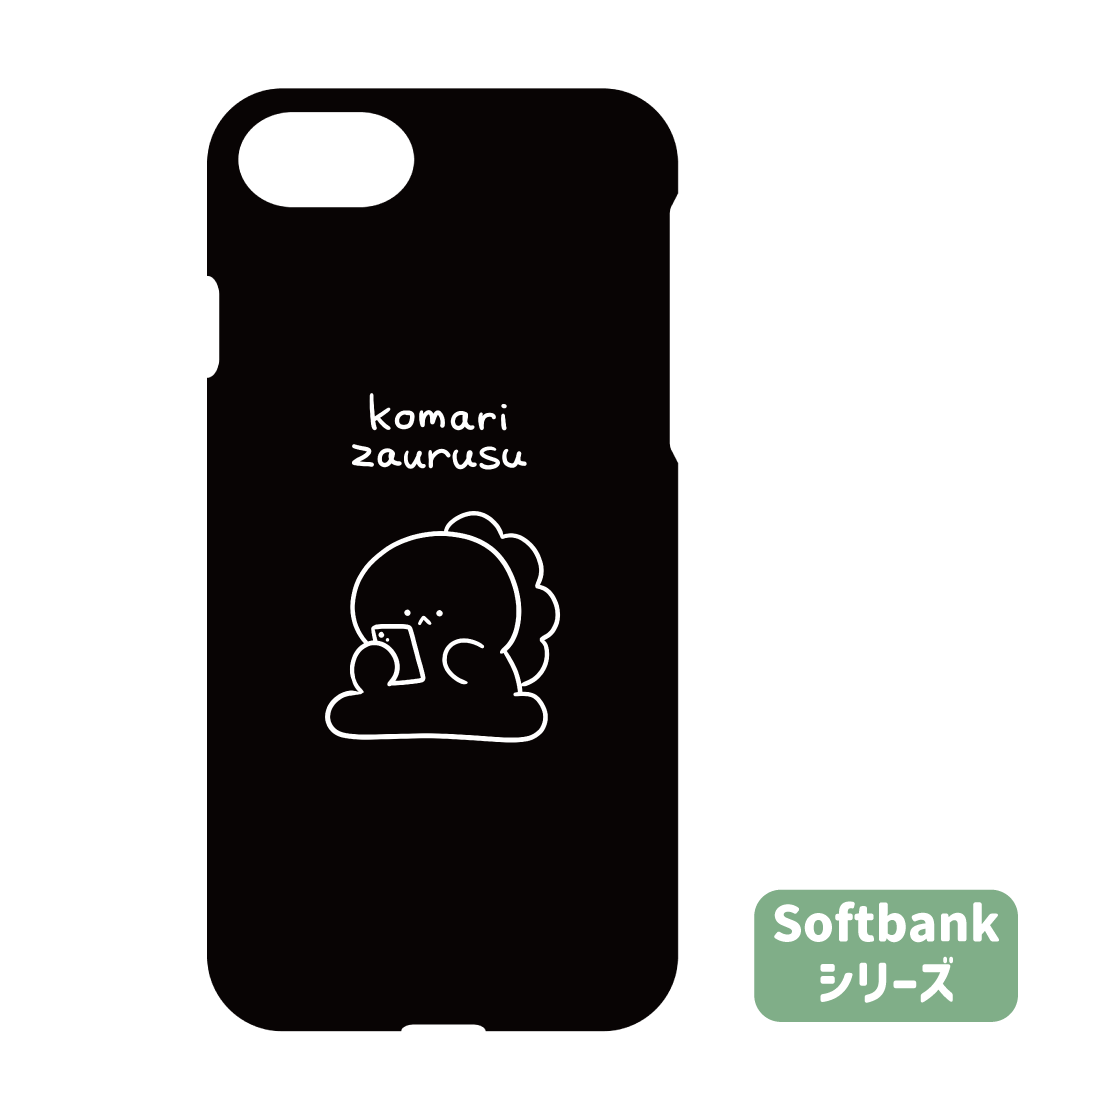 [Troublesome Zaurus] Smartphone case compatible with almost all models softbank series (Troubled Zaurus) [Shipped in early June]